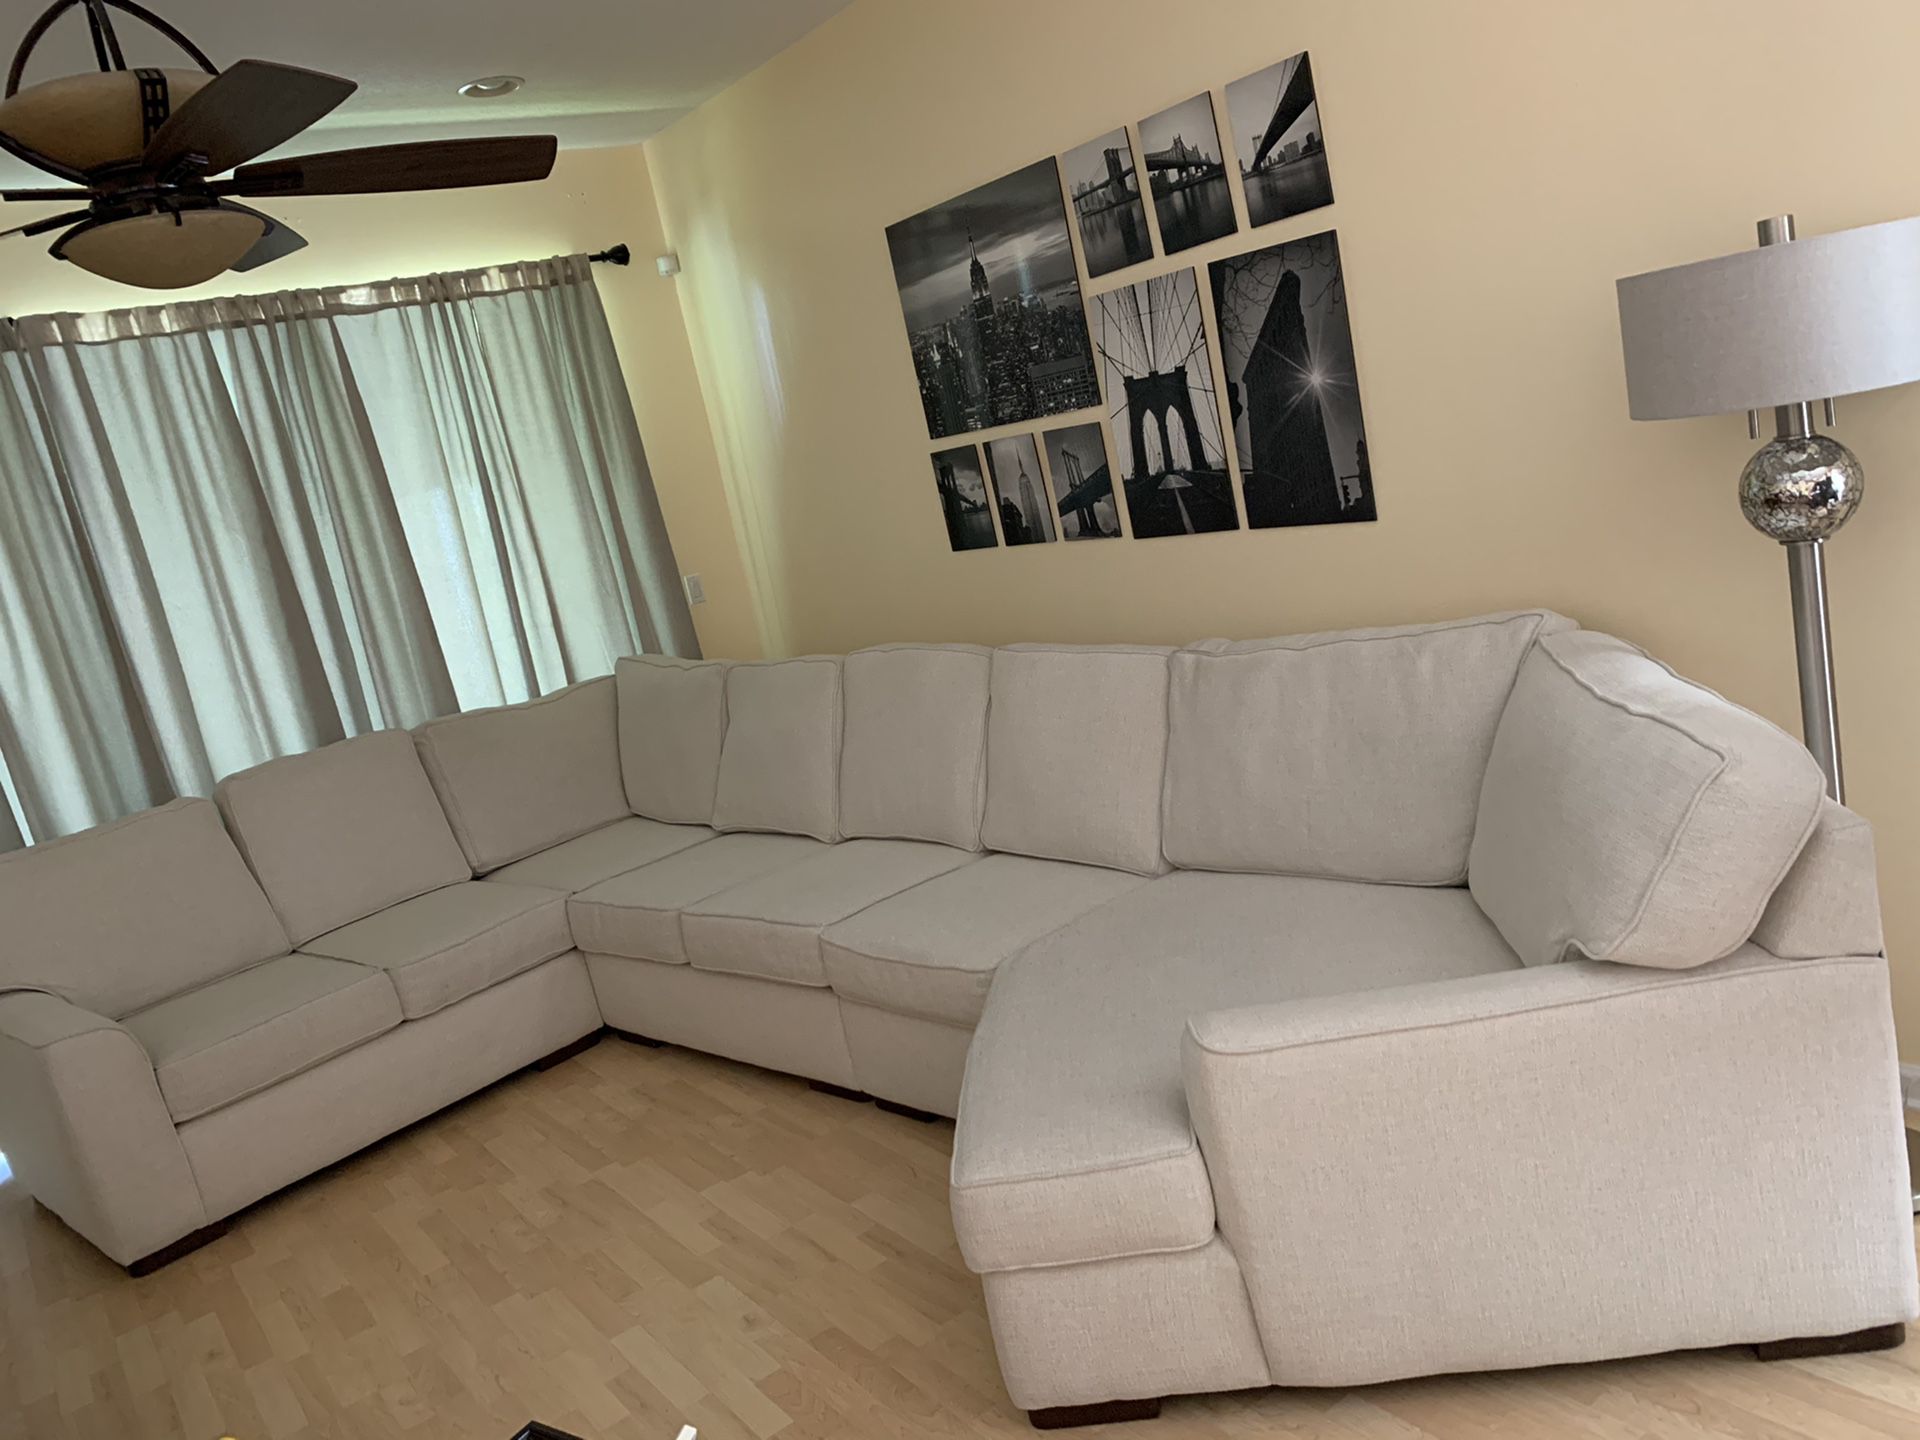 Five piece sectional couch from city furniture